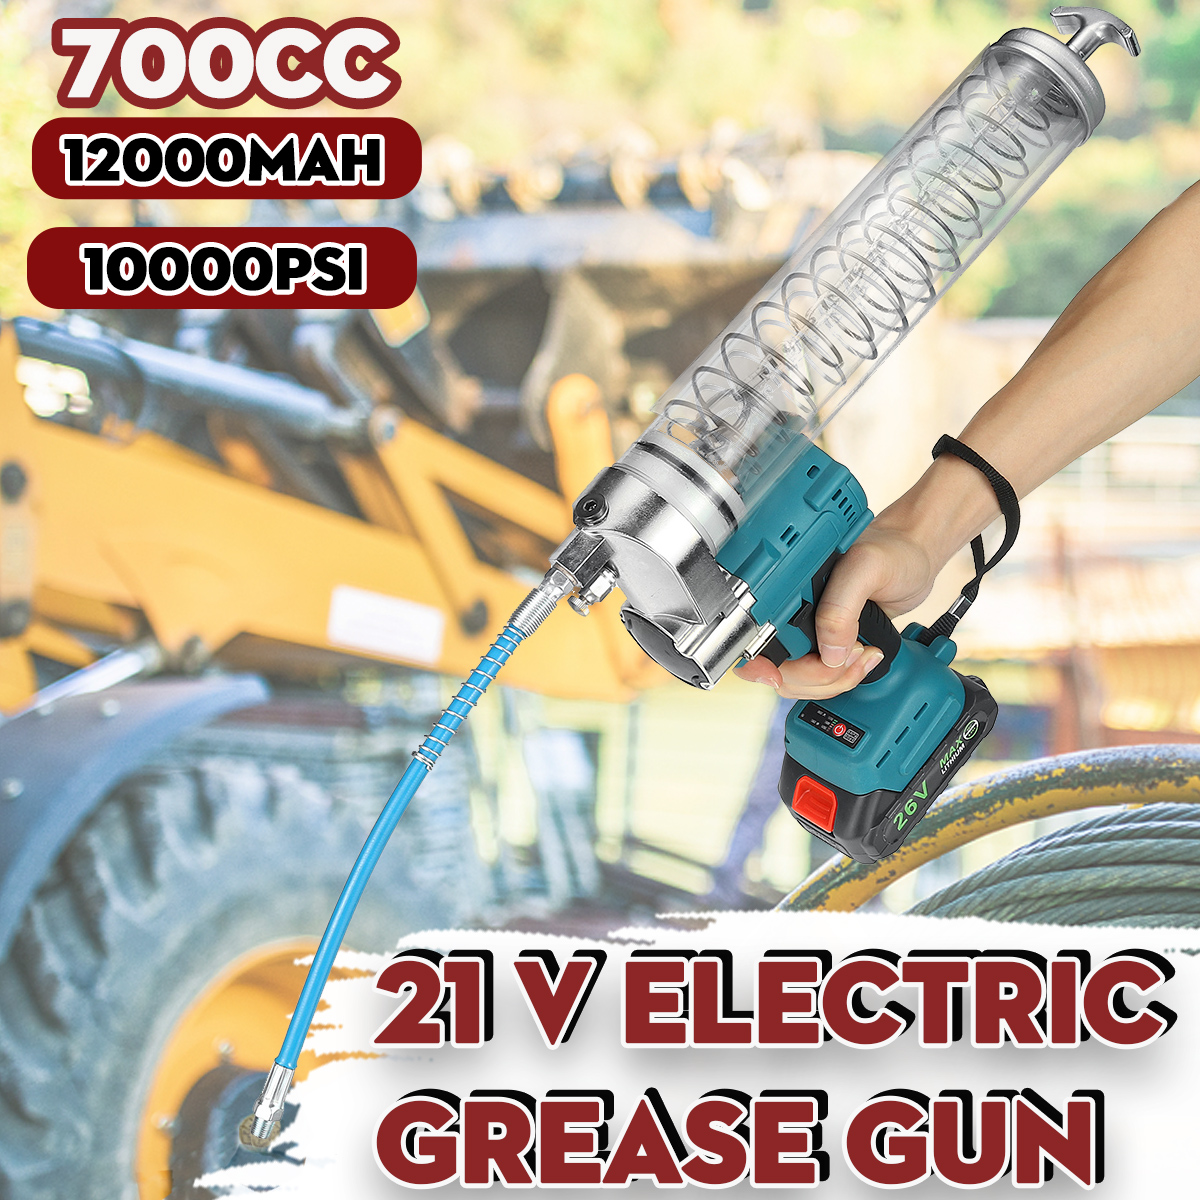 10000PSI-700CC-21V-Cordless-Electric-Grease-Guns-Excavator-Car-Maintenance-Tool-with-Butter-Pipe-1943461-1